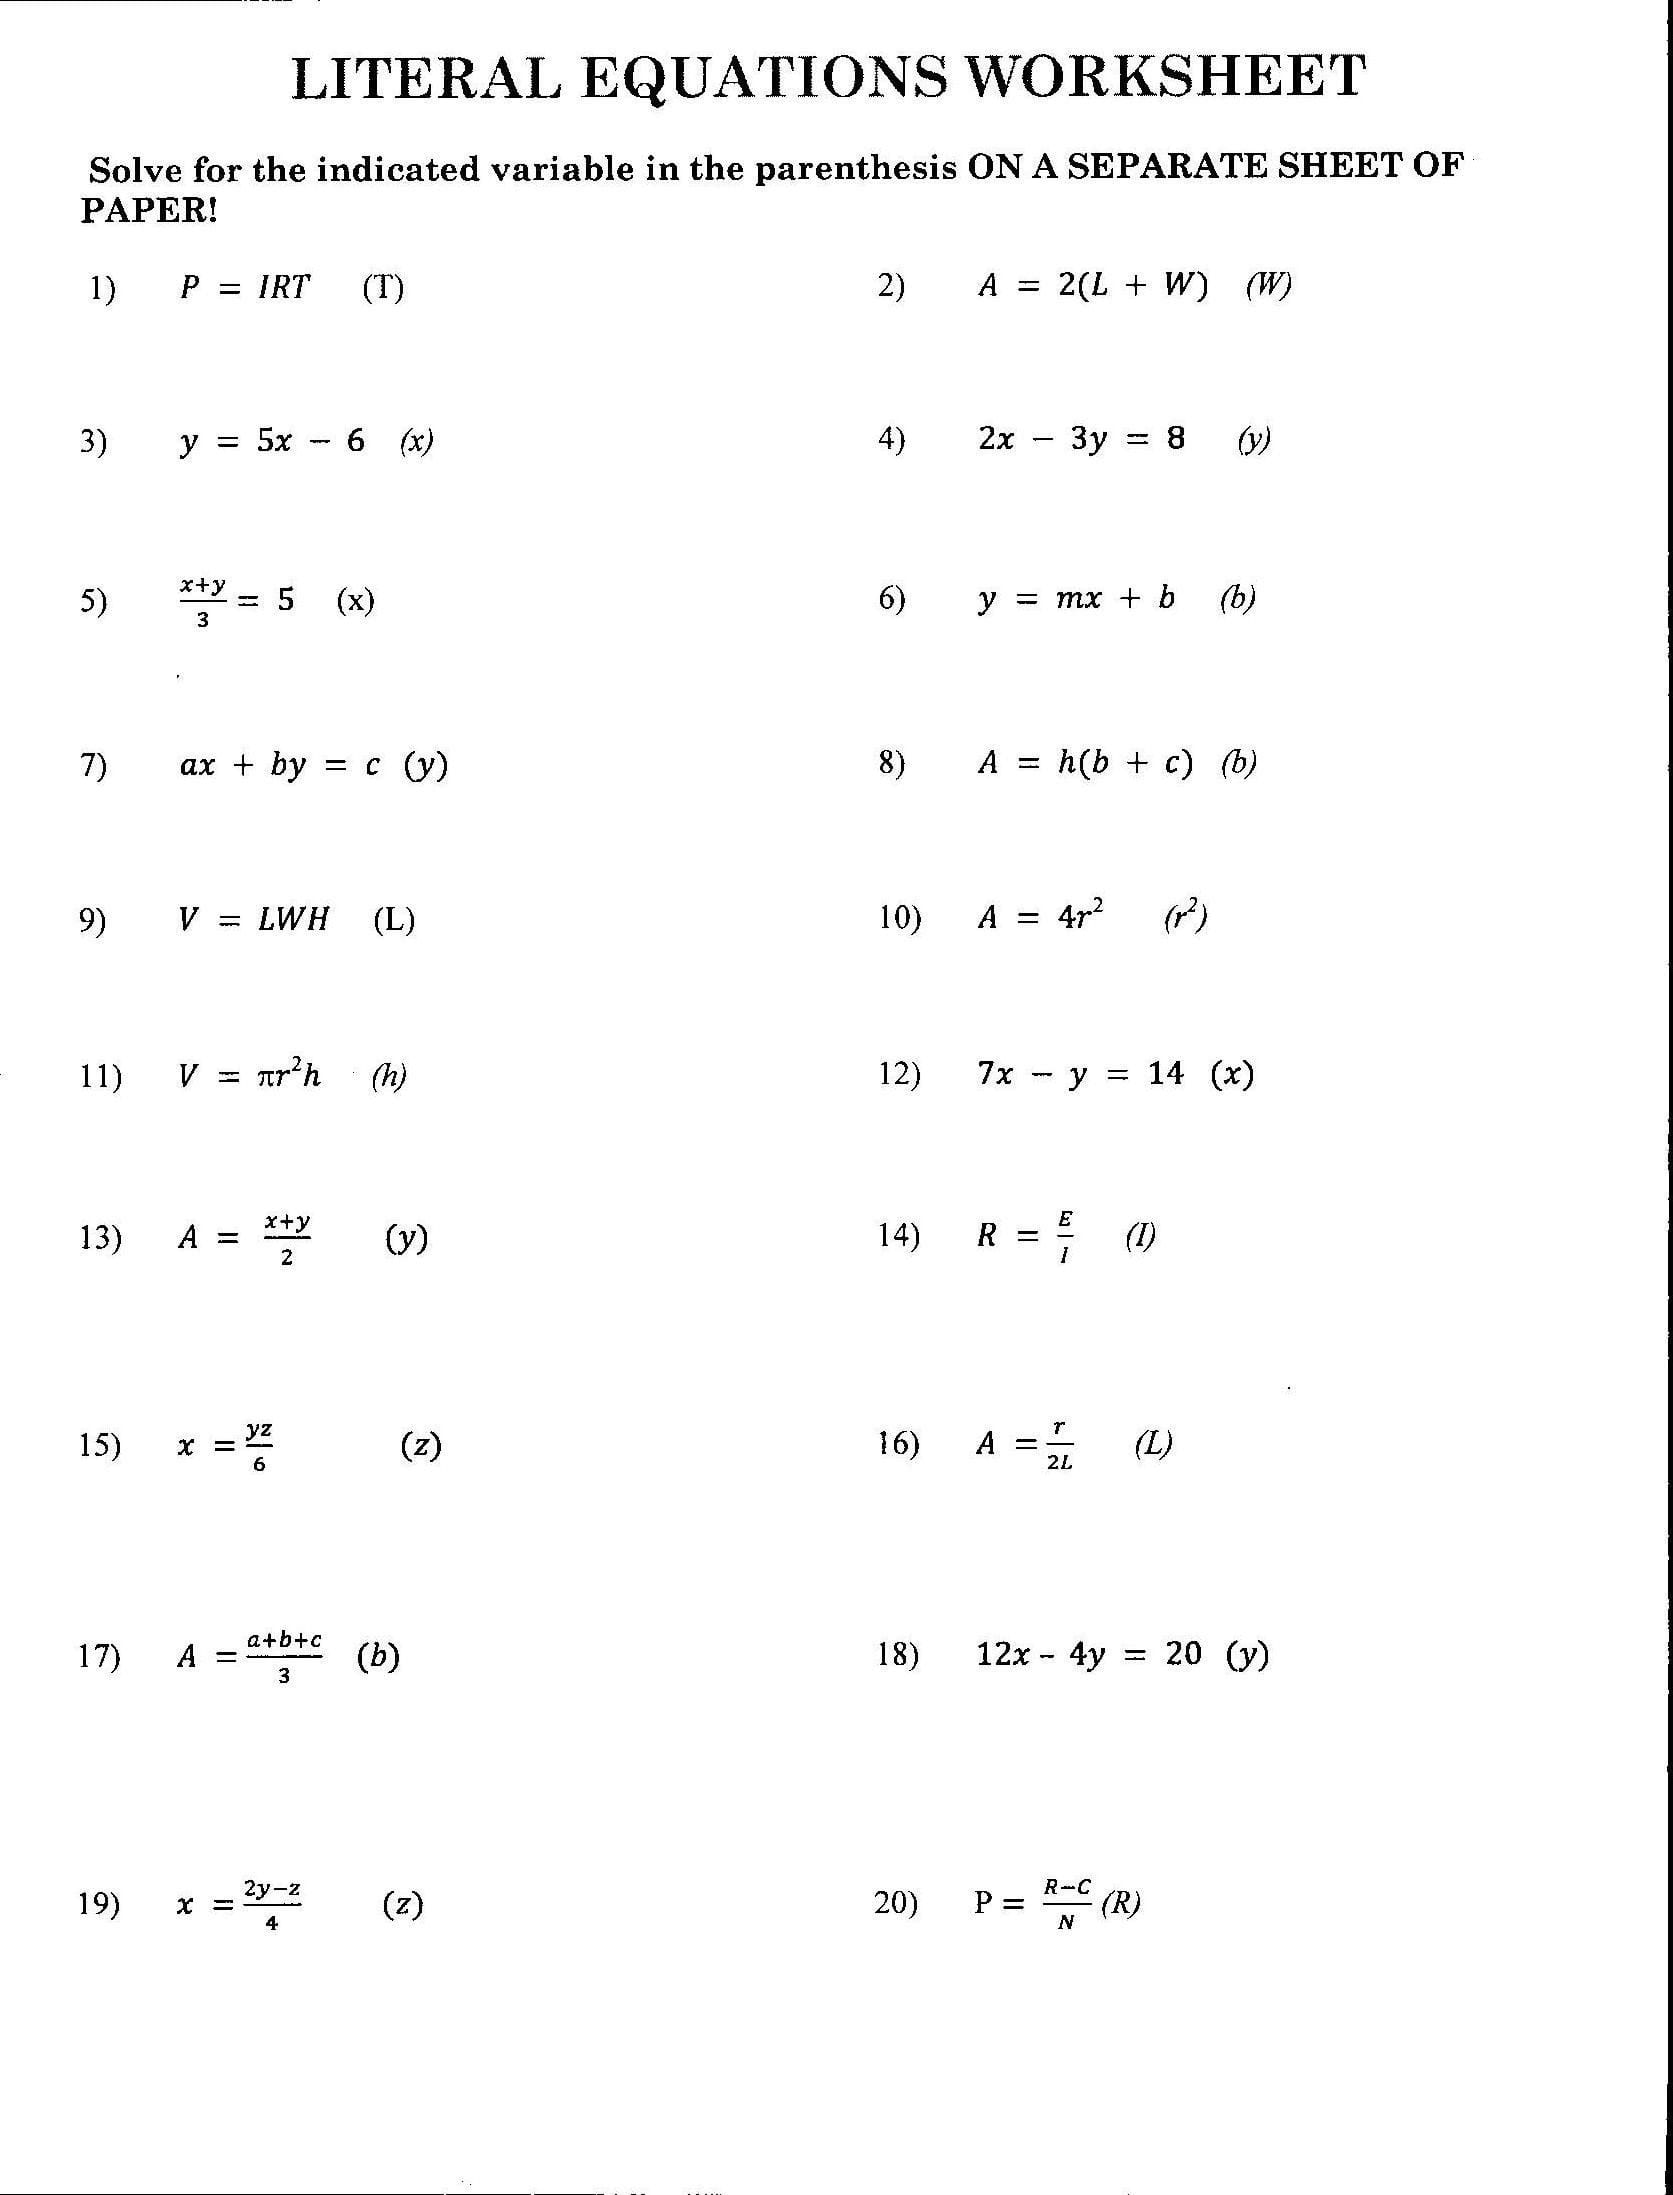 solving-systems-of-equations-worksheet-answer-key-algebra-2-solving-systems-of-linear